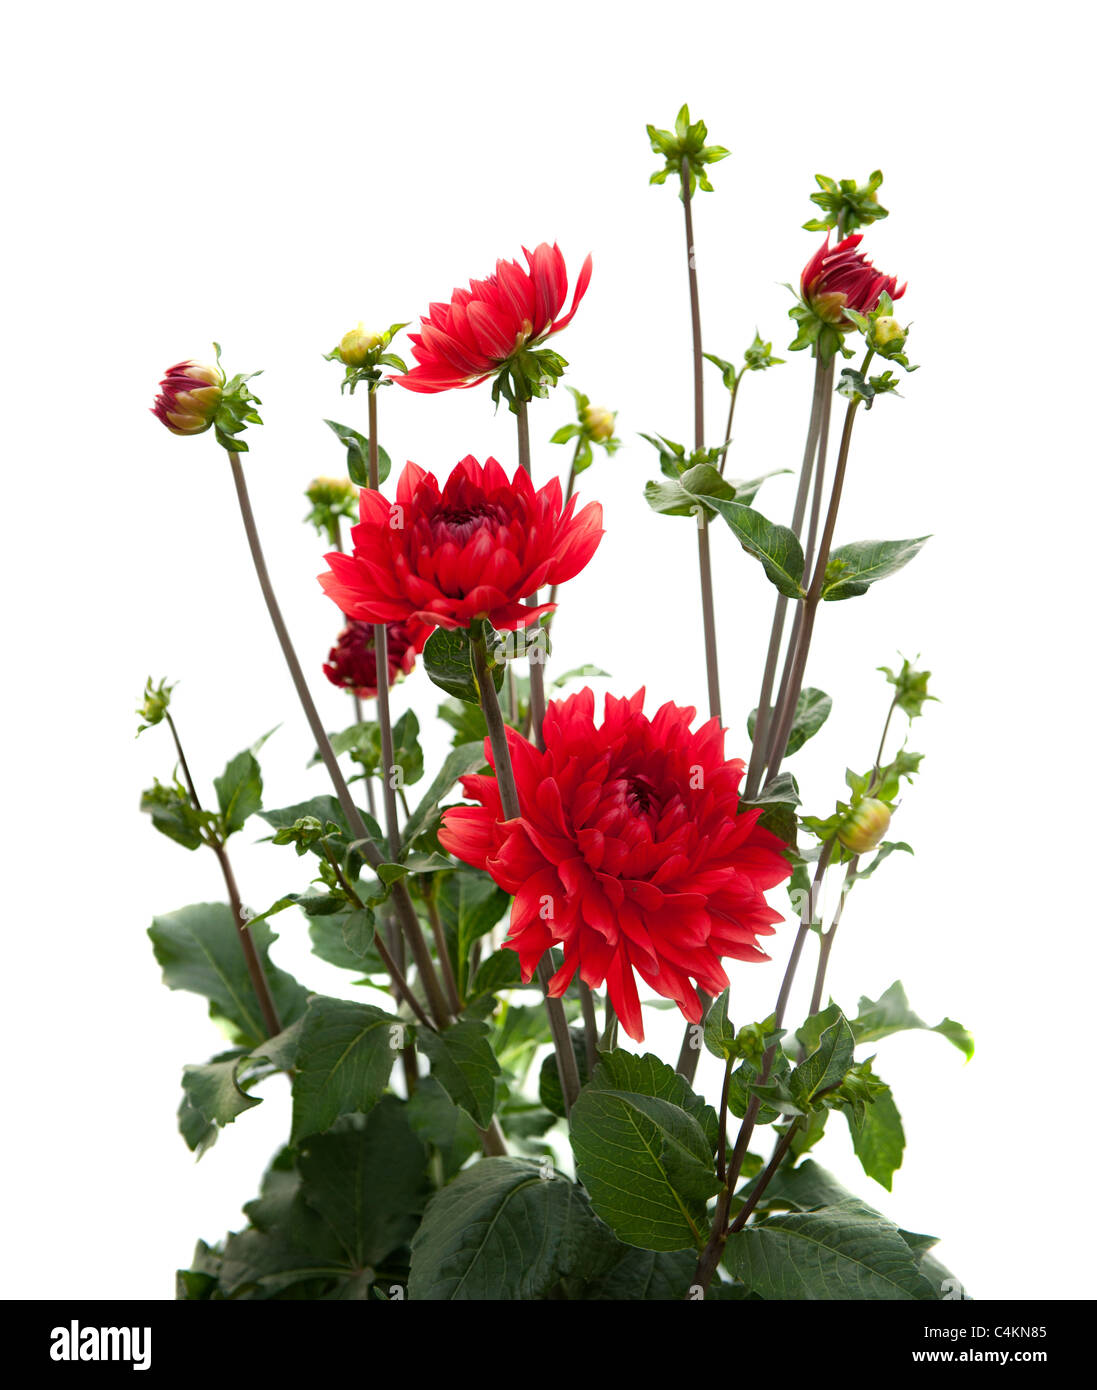 beautiful red dahlia flower botanical print. flowers measure 7 inches across. Stock Photo